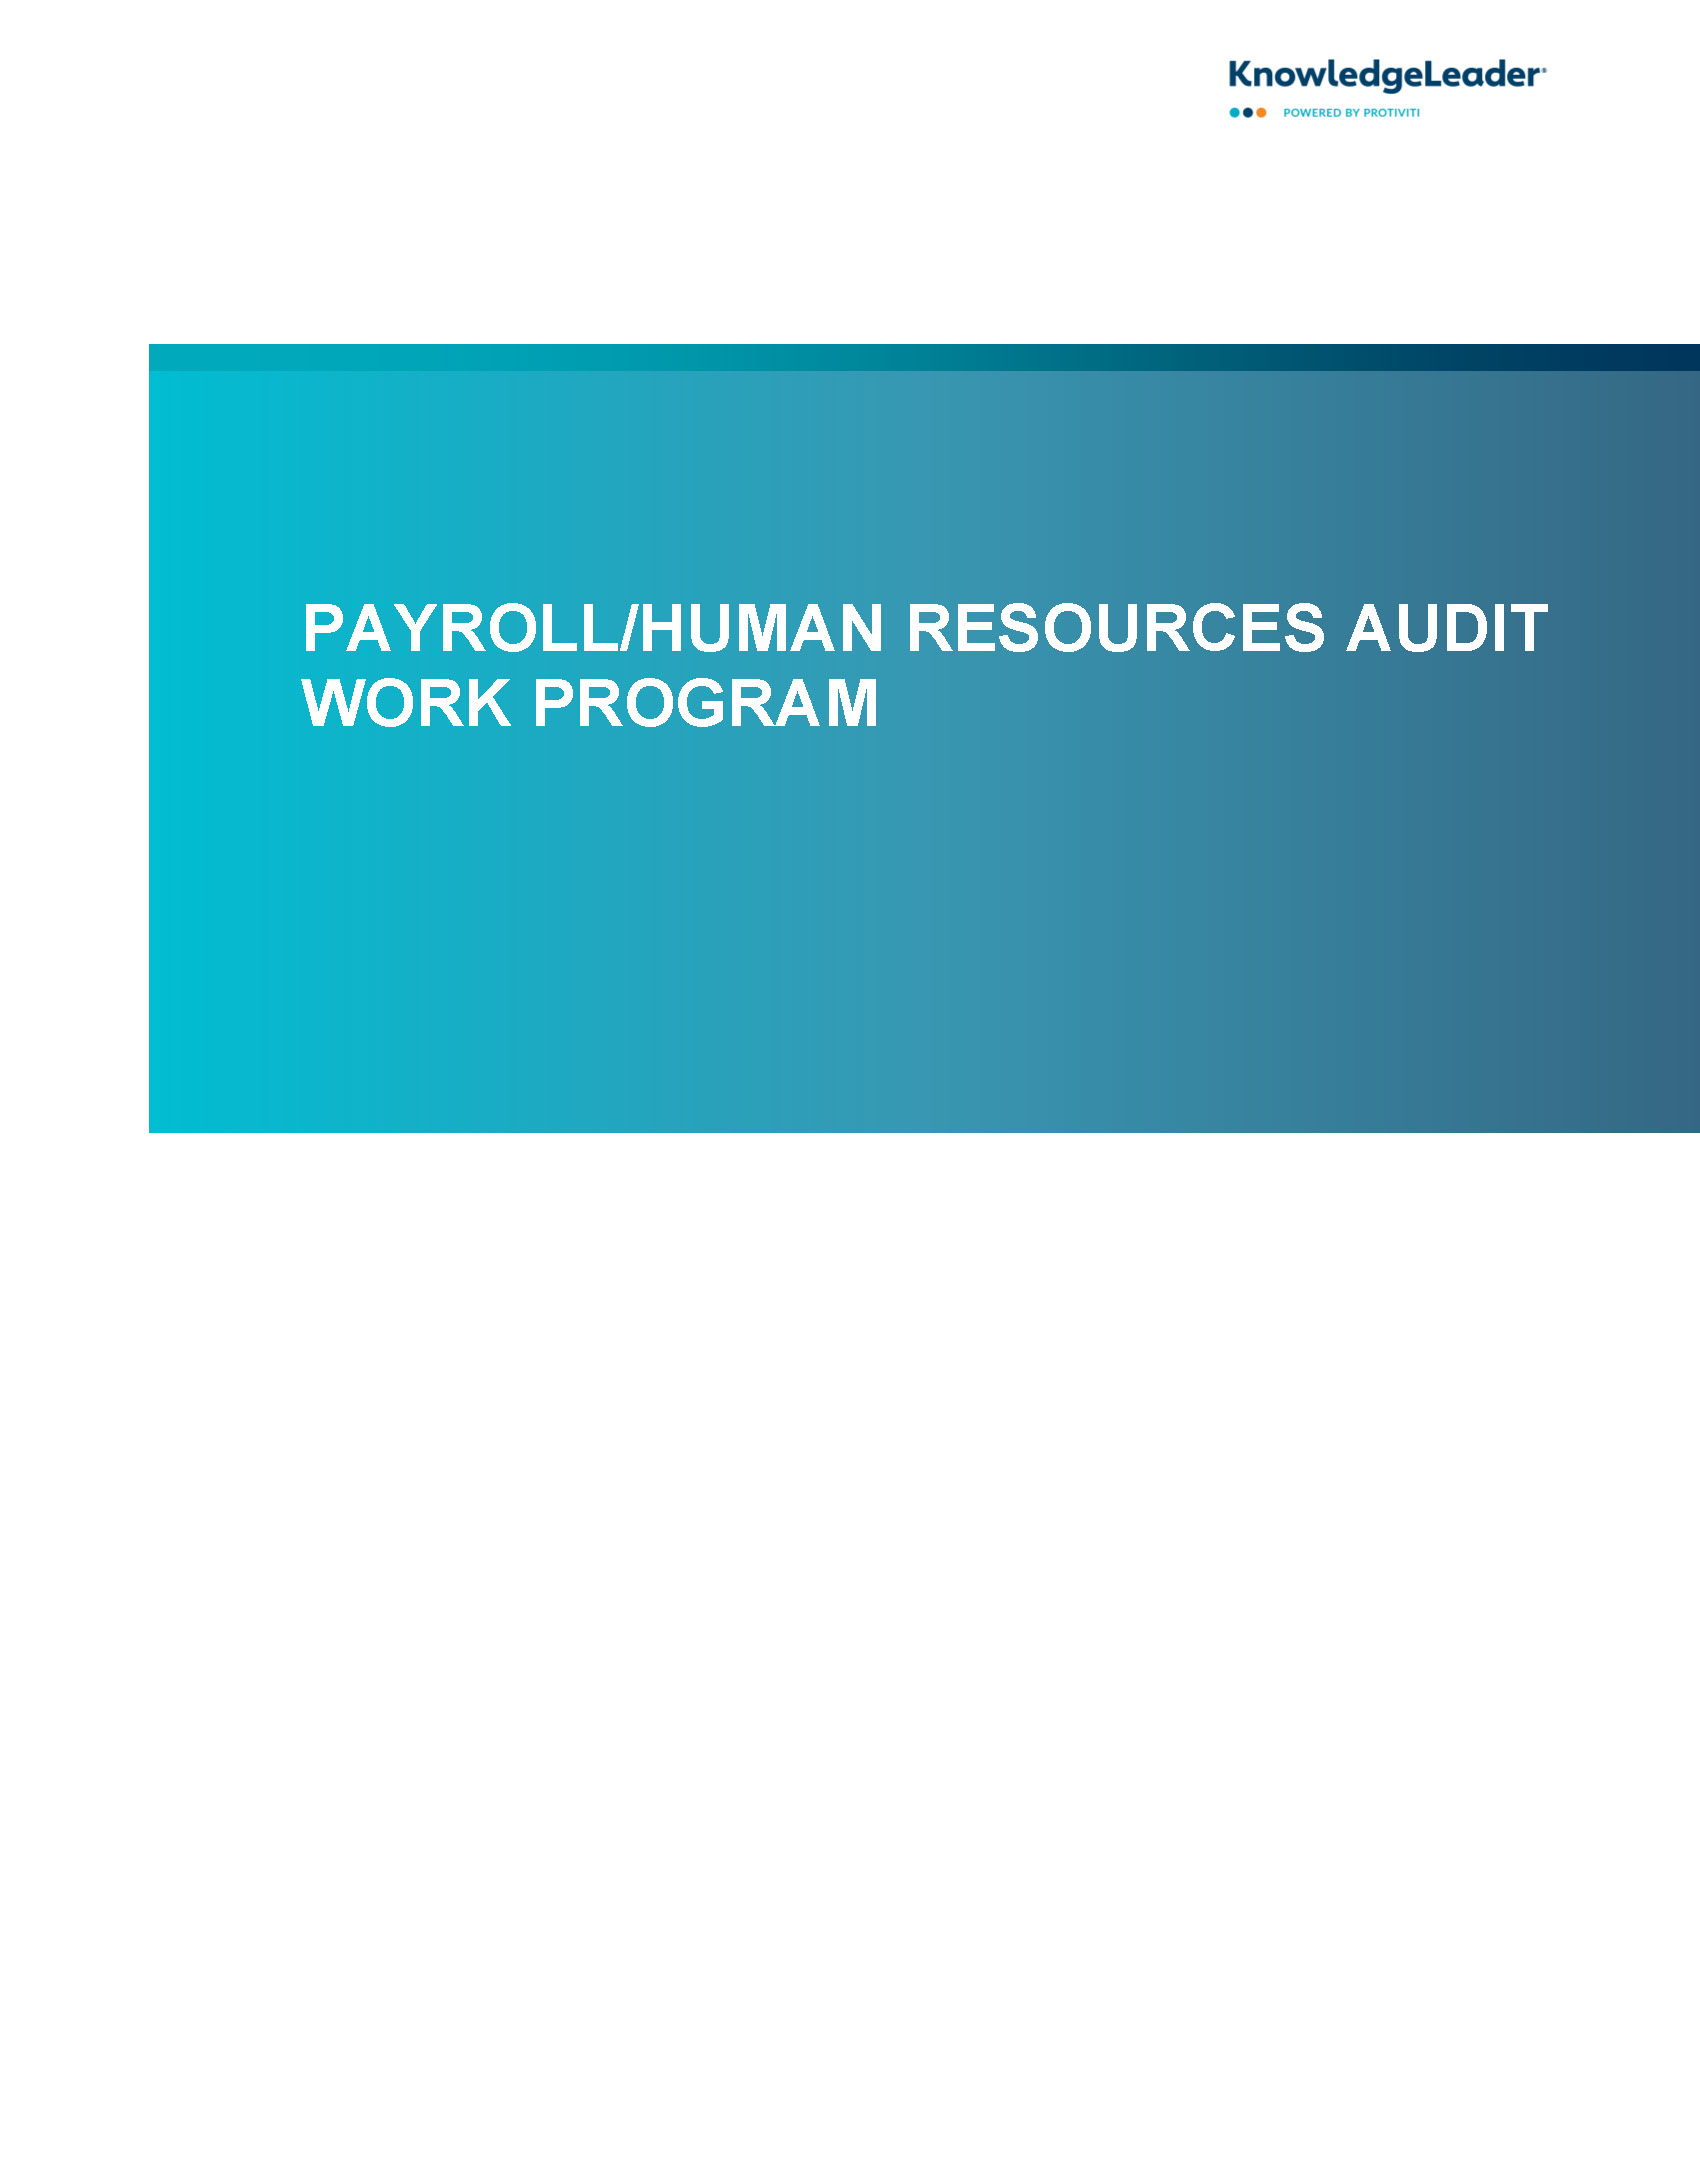 Screenshot of the first page of the Payroll/Human Resources Audit Work Program